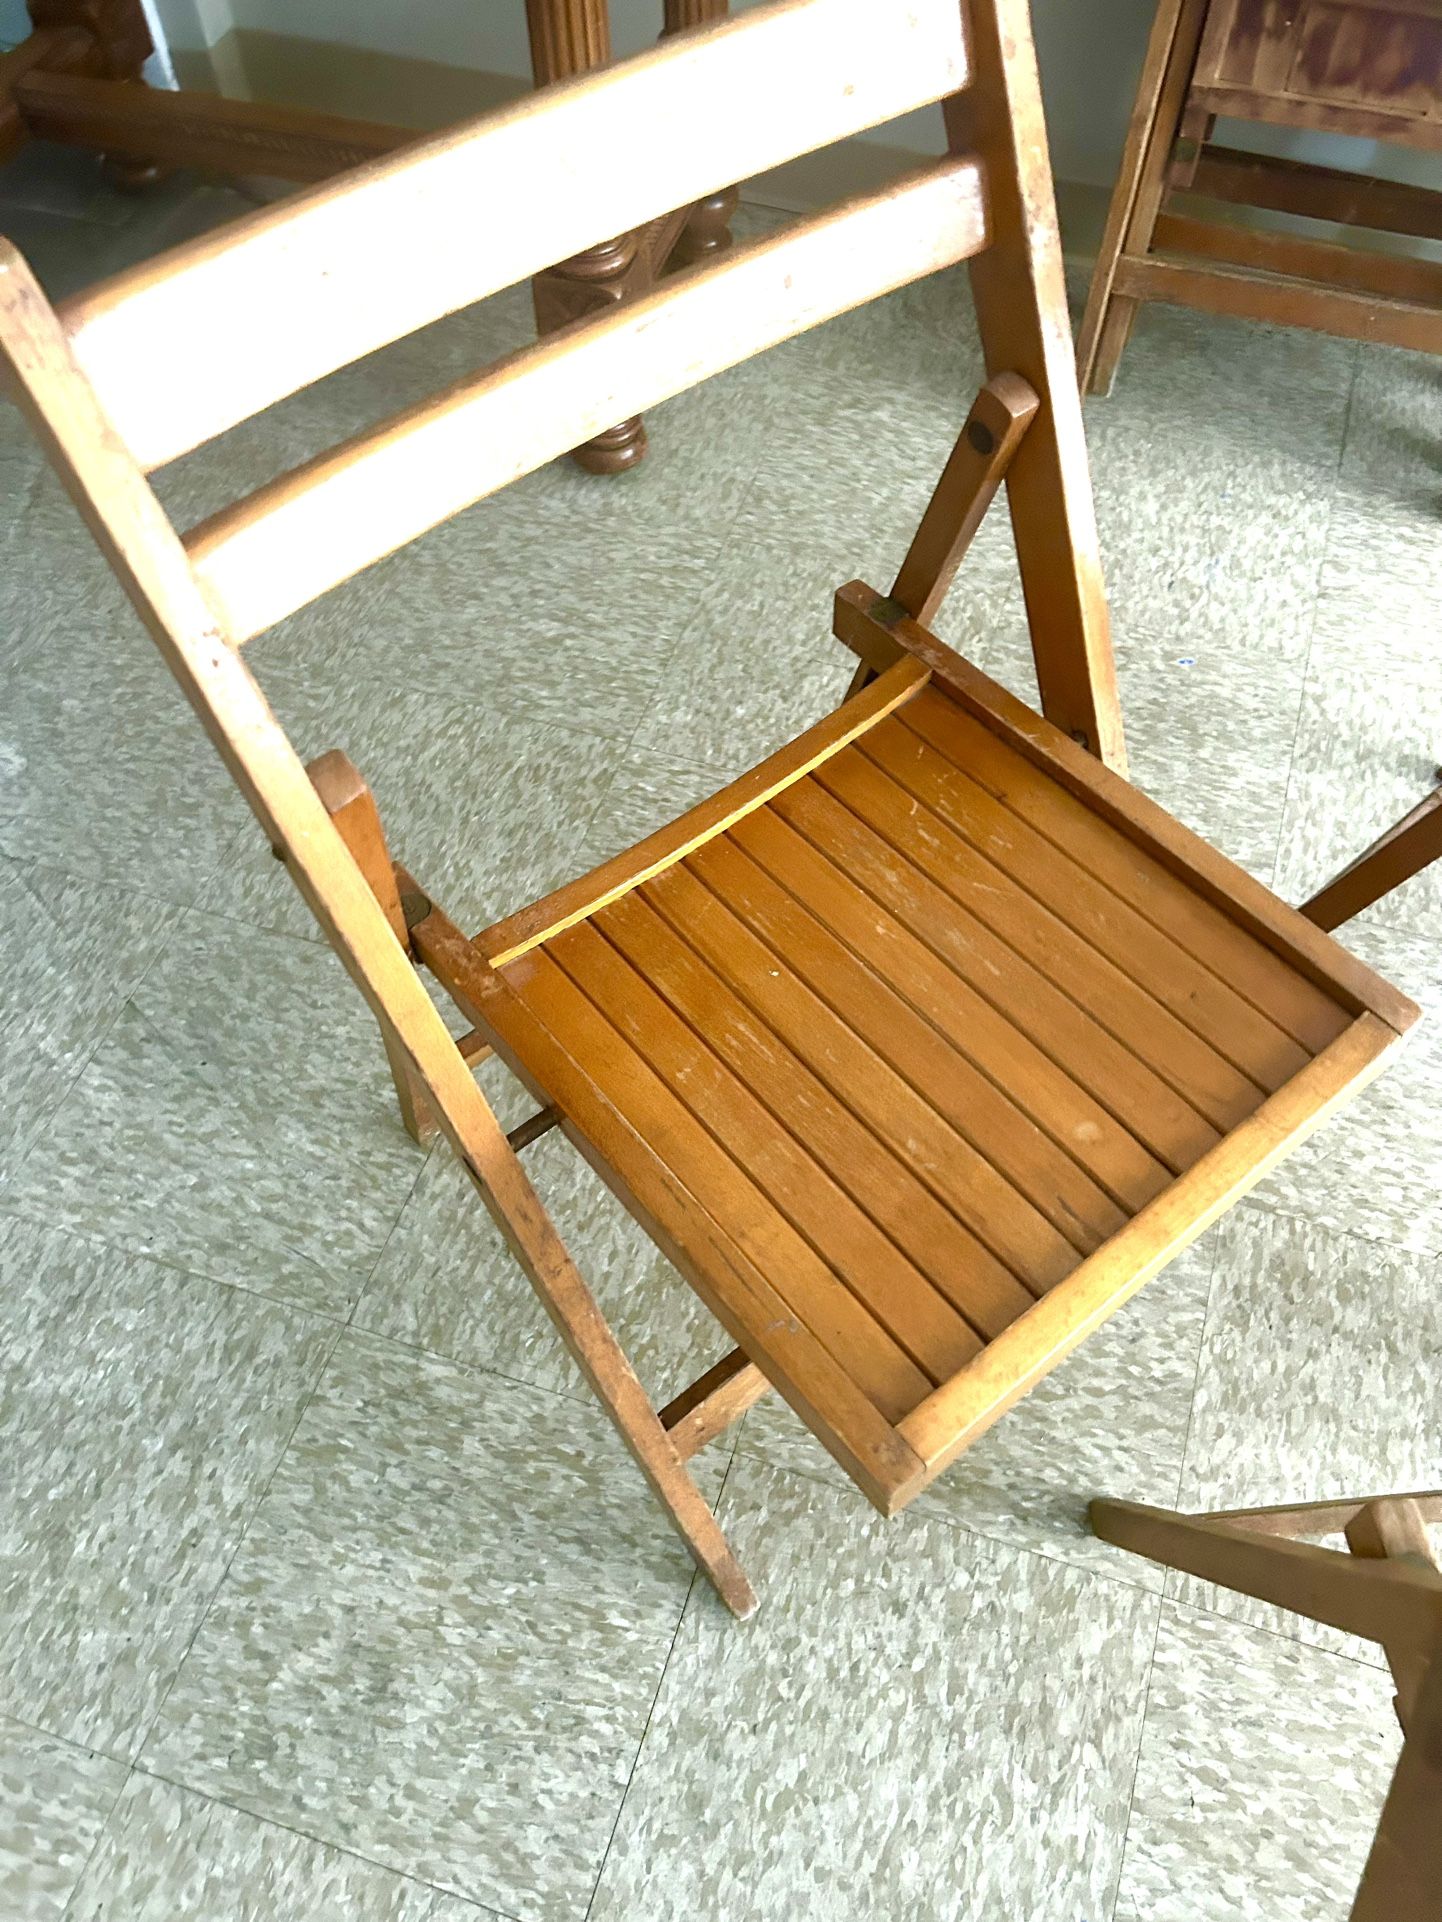 6 Vintage Wood Folding Chairs 